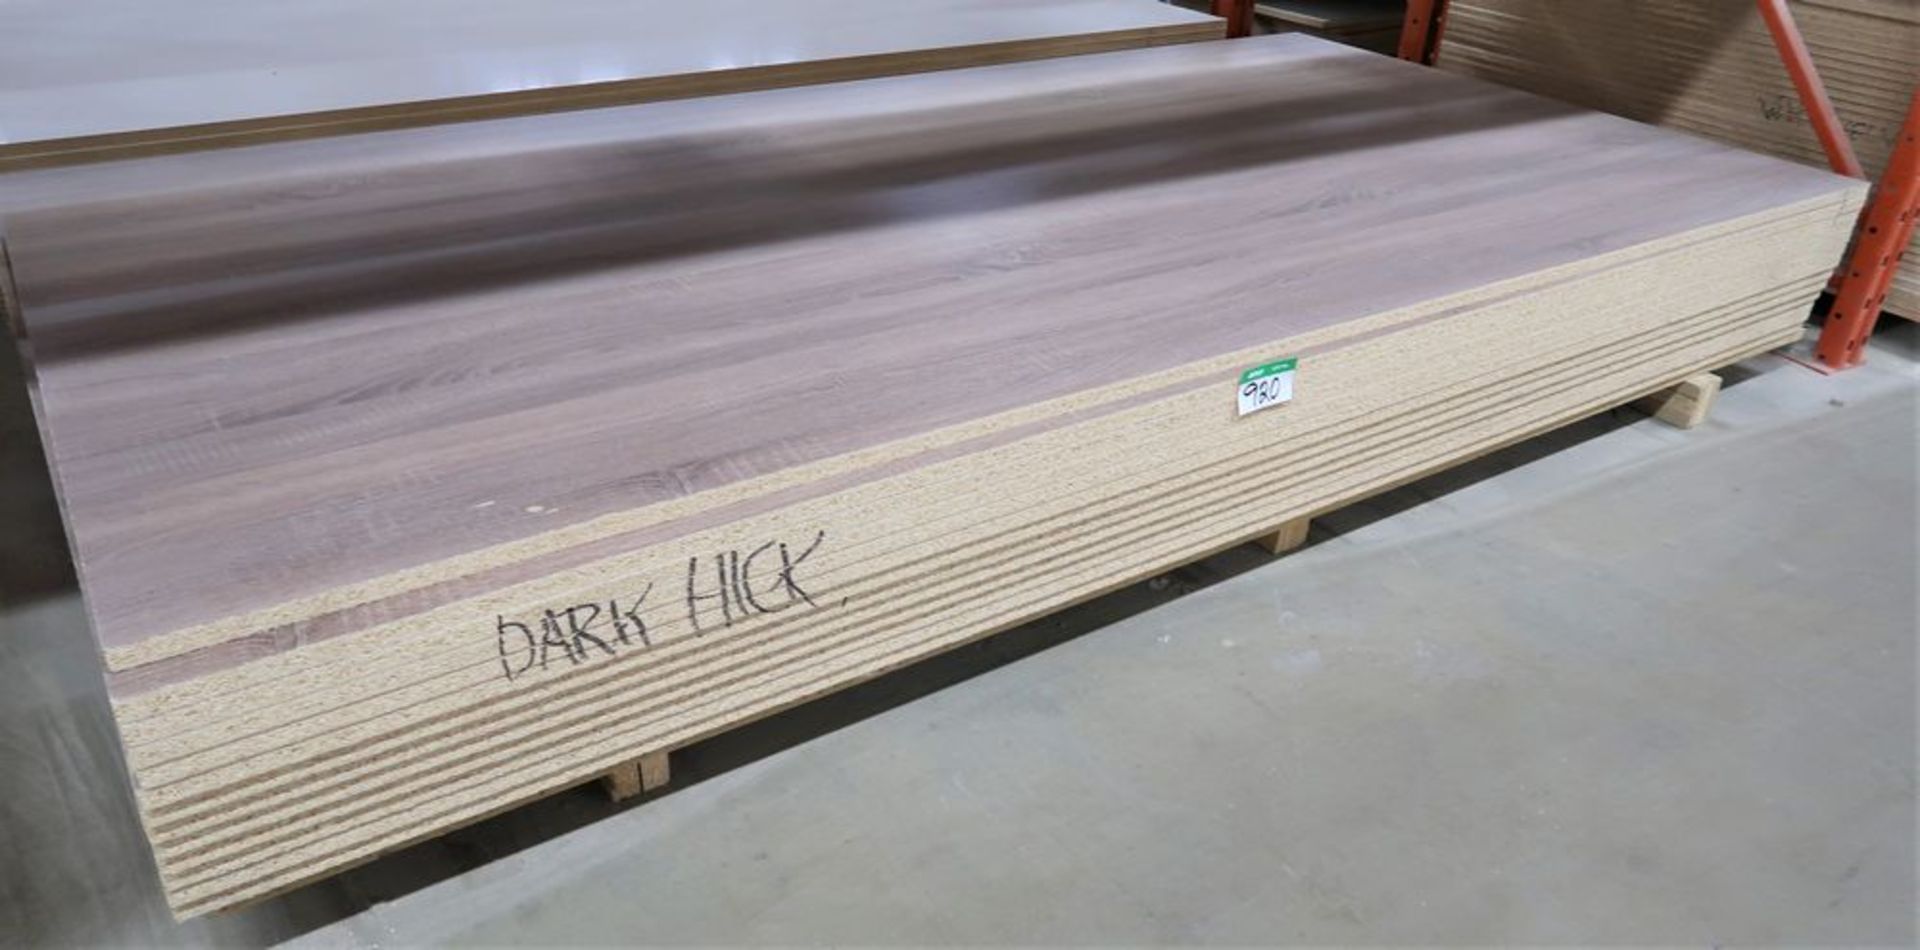 LOT OF 13 SHEETS DARK HICKORY 4' X 8' X 3/4" 2/S